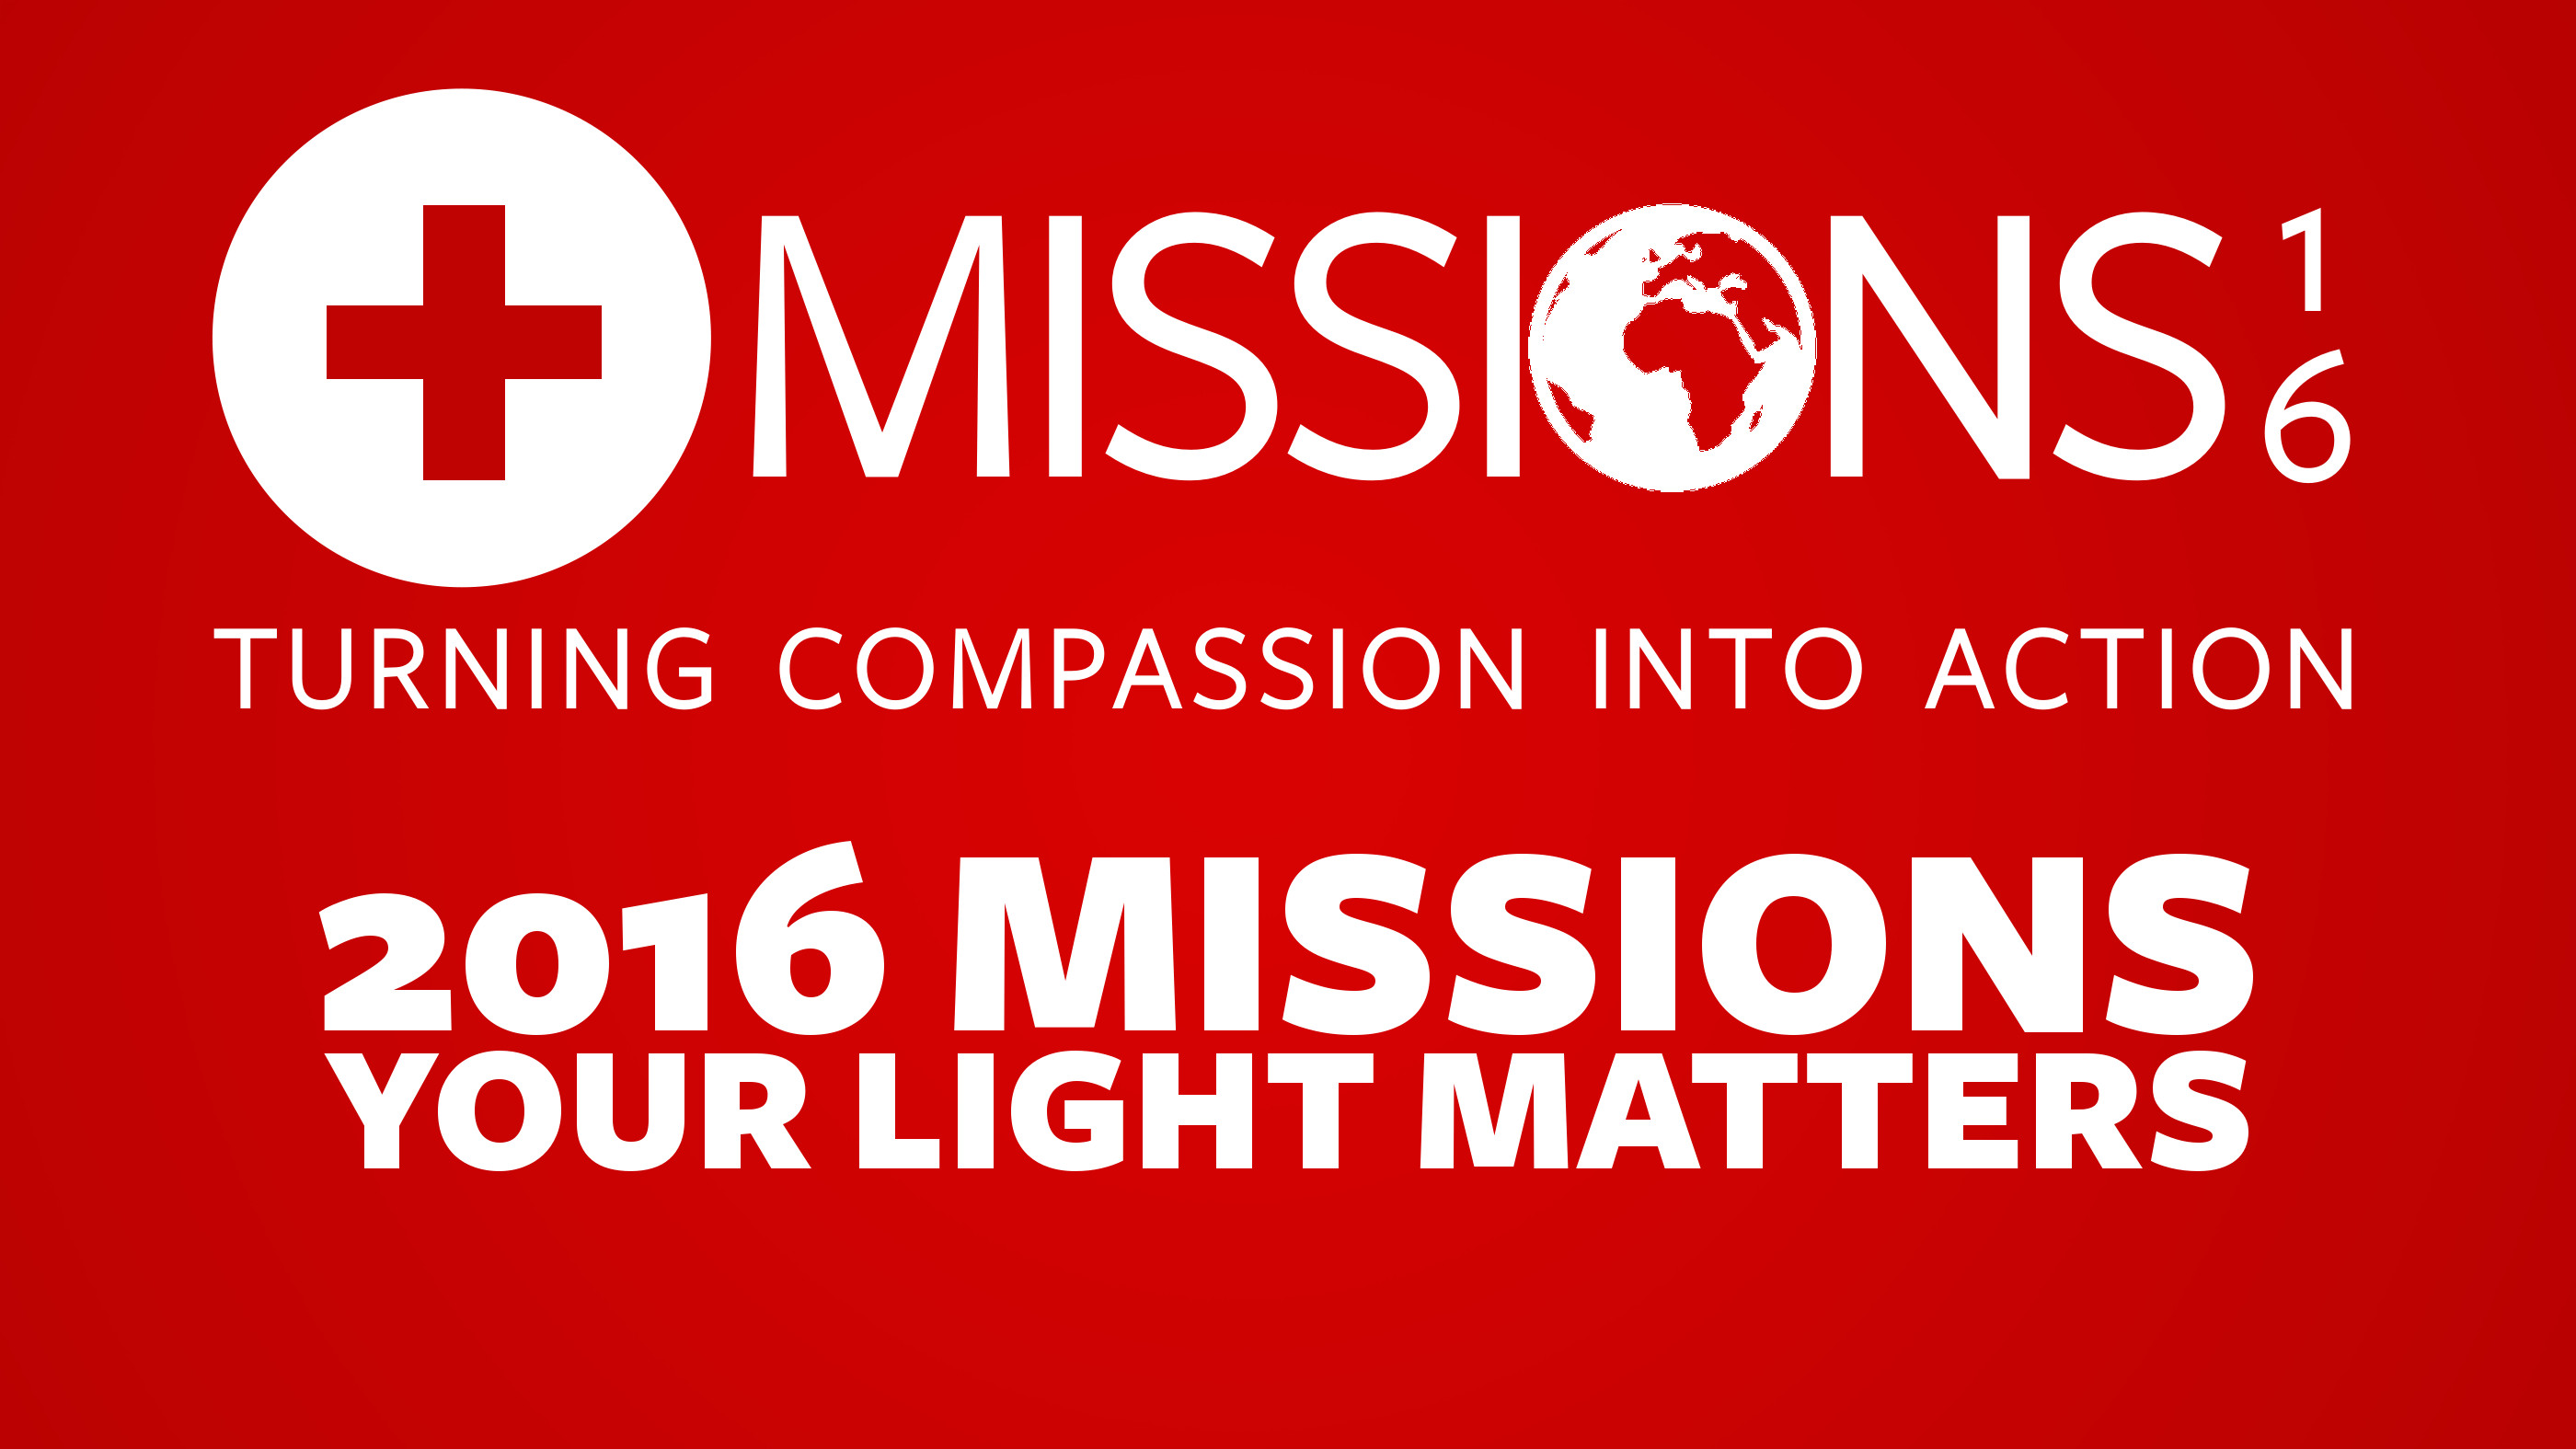 Missions 2016 | Your Light Matters